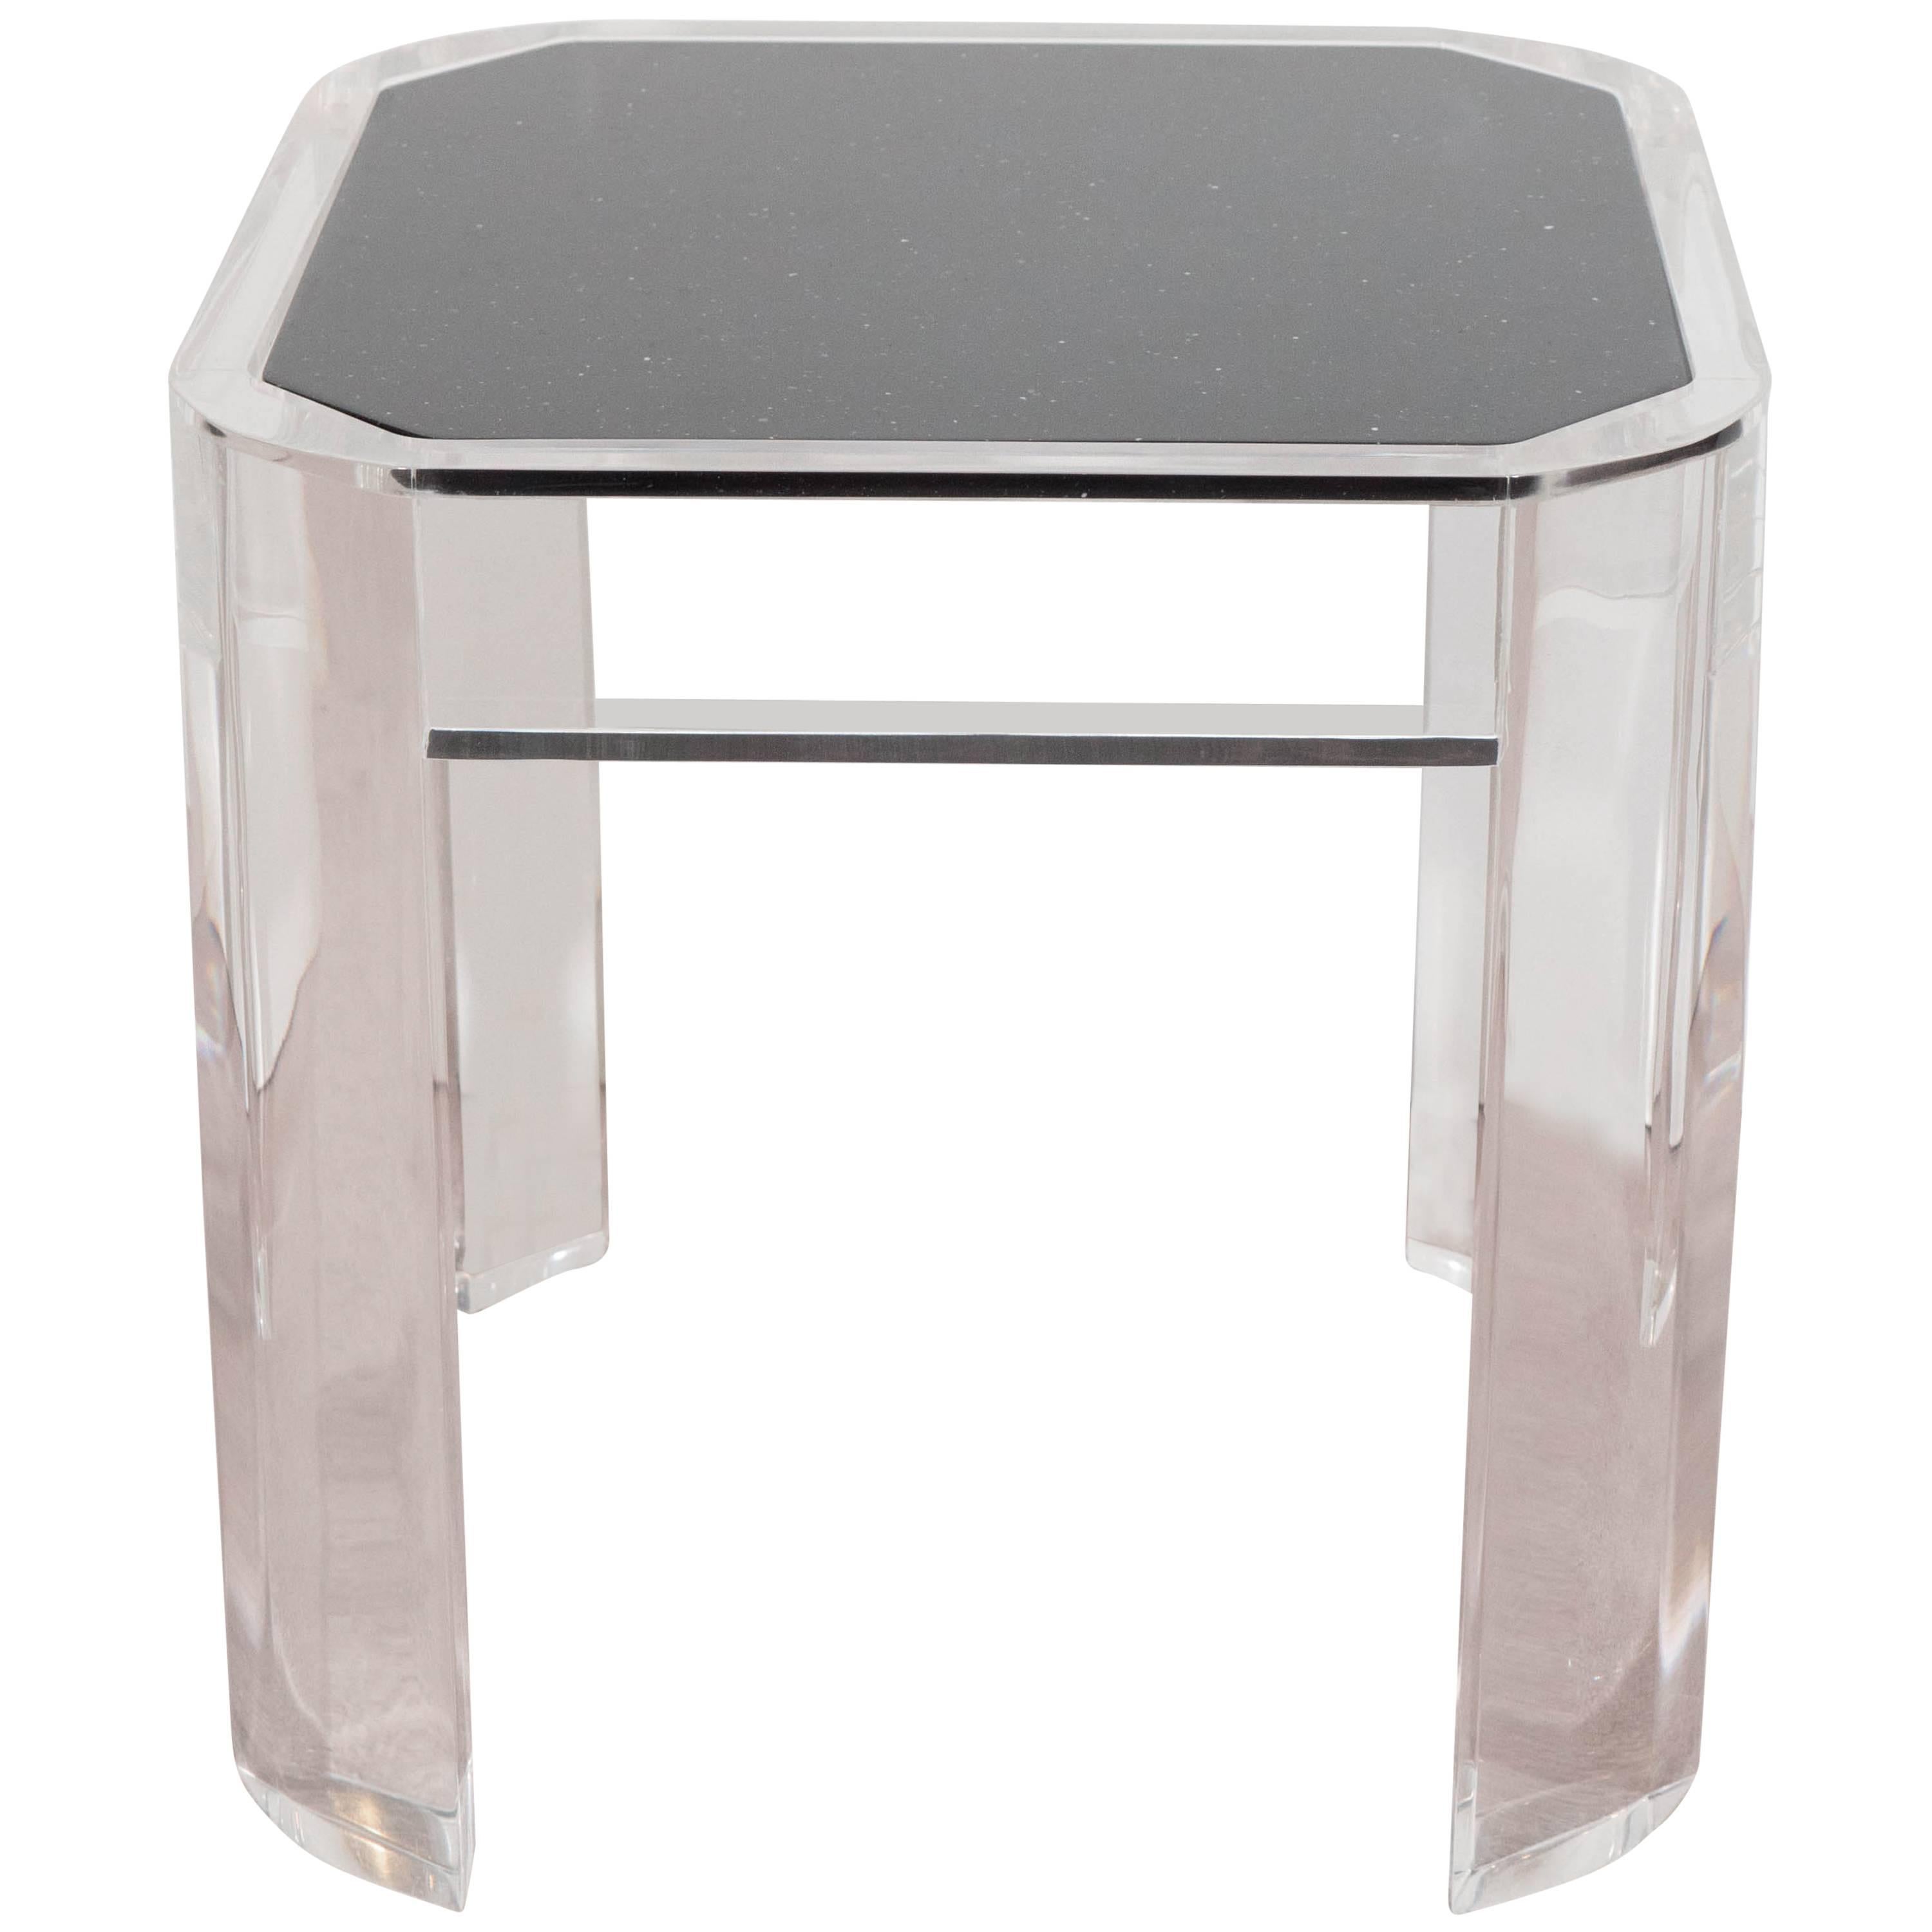 Karl Springer Style Lucite Side Table with Black Faux Granite Top